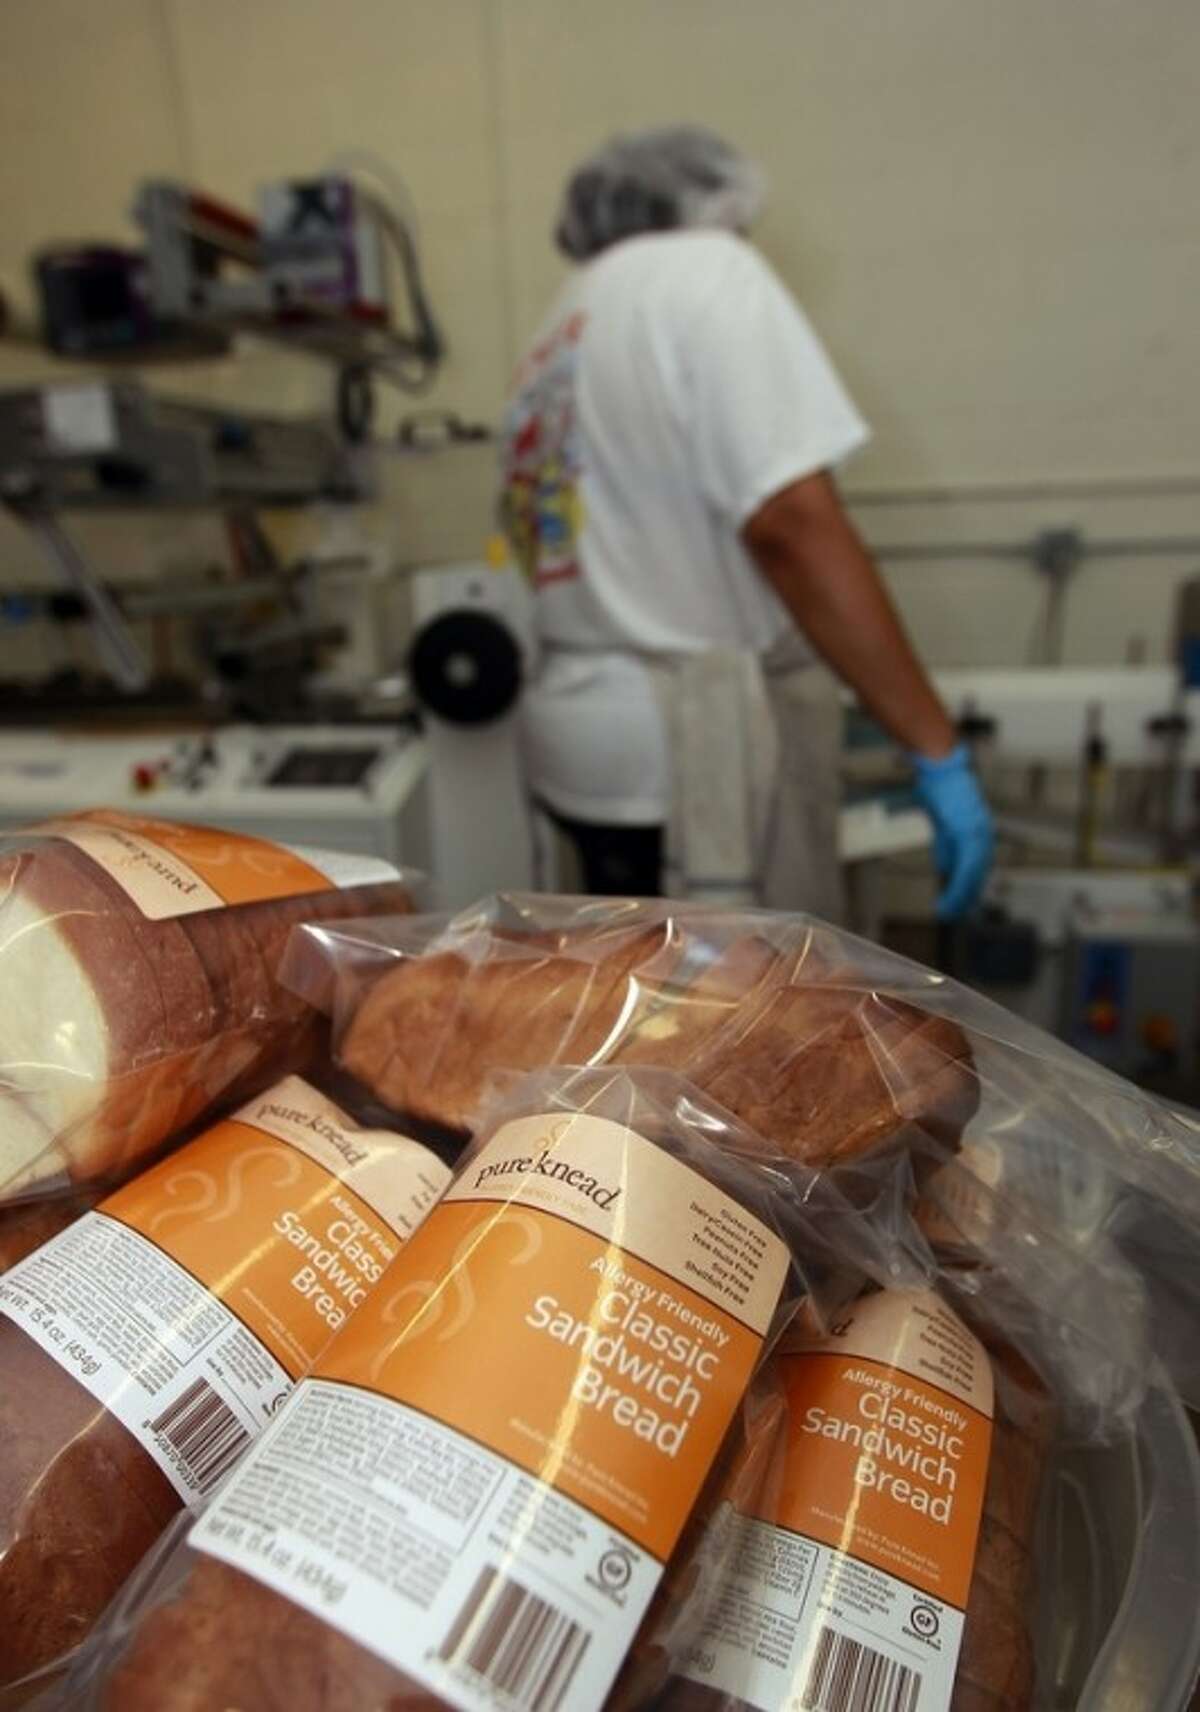 In this Thursday, July 14, 2012 photo, a worker packages gluten-free bread at Pure Knead bakery sandwich bread in Decatur, Ga. A decade ago, virtually no one in the United States seemed to have a problem eating gluten in bread and other foods. Now, millions do and spend more than $7 billion on gluten-free products. Yet, experts estimate that more than half of those consumers dont have any clear-cut reaction to gluten. (AP Photo/John Bazemore)